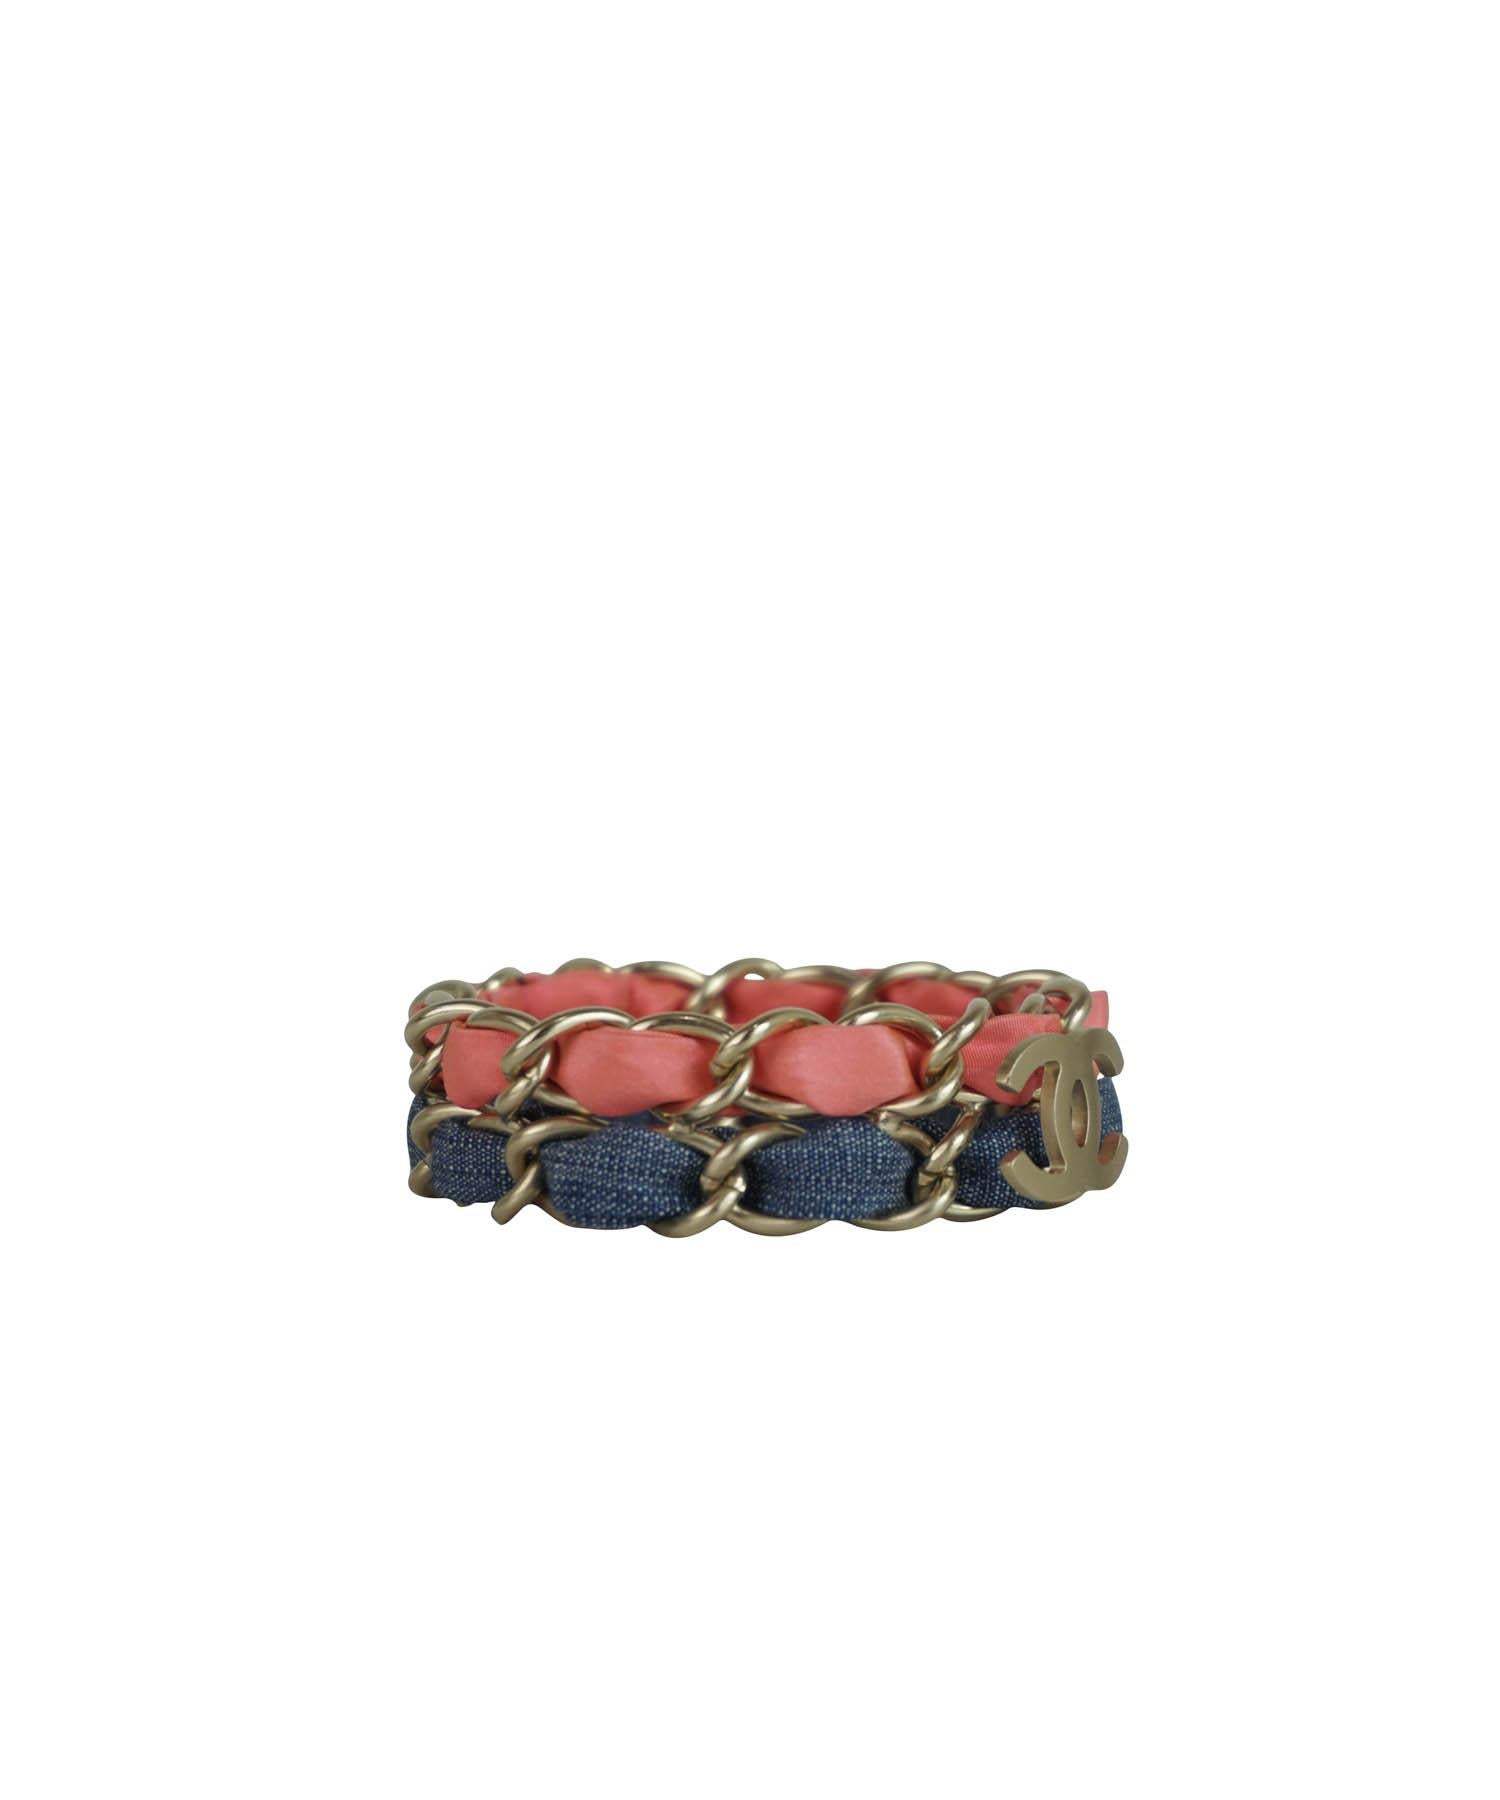 Chanel Y2K pink and blue denim fabric wrapped light gold chain CC bracelet. Features CC brushed gold closure at front, 2 rows of traditional Chanel fabric wrapped chain, no closure, chain is moveable. Please check measurements to be sure it will go